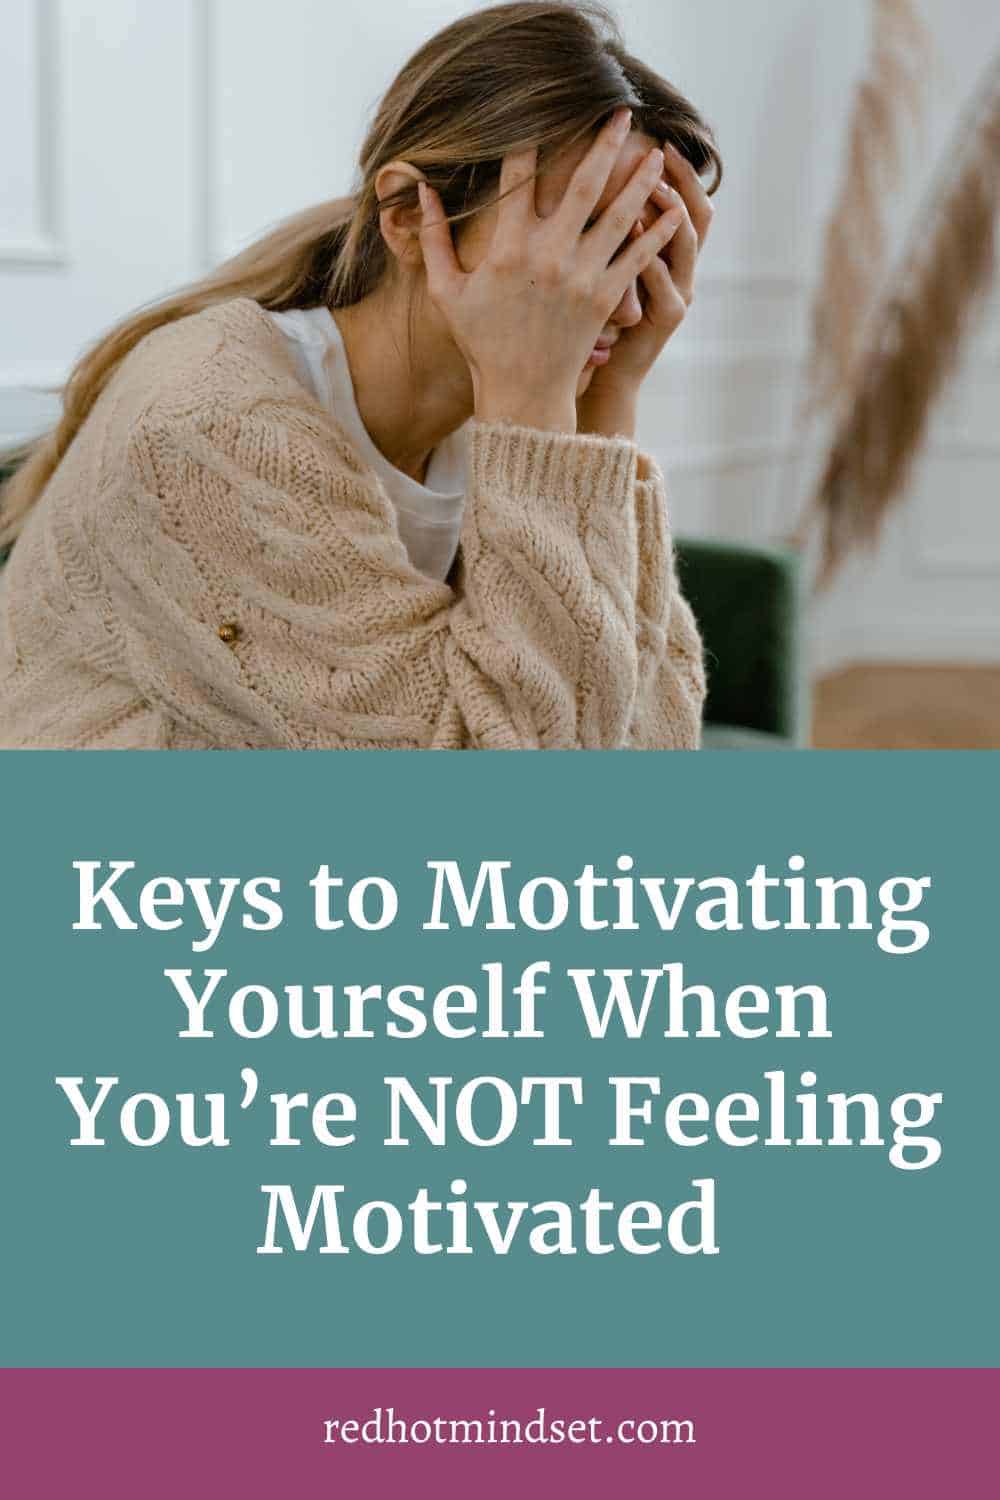 Ep 176 | Keys to Motivating Yourself When You’re NOT Feeling Motivated with Gillian Perkins